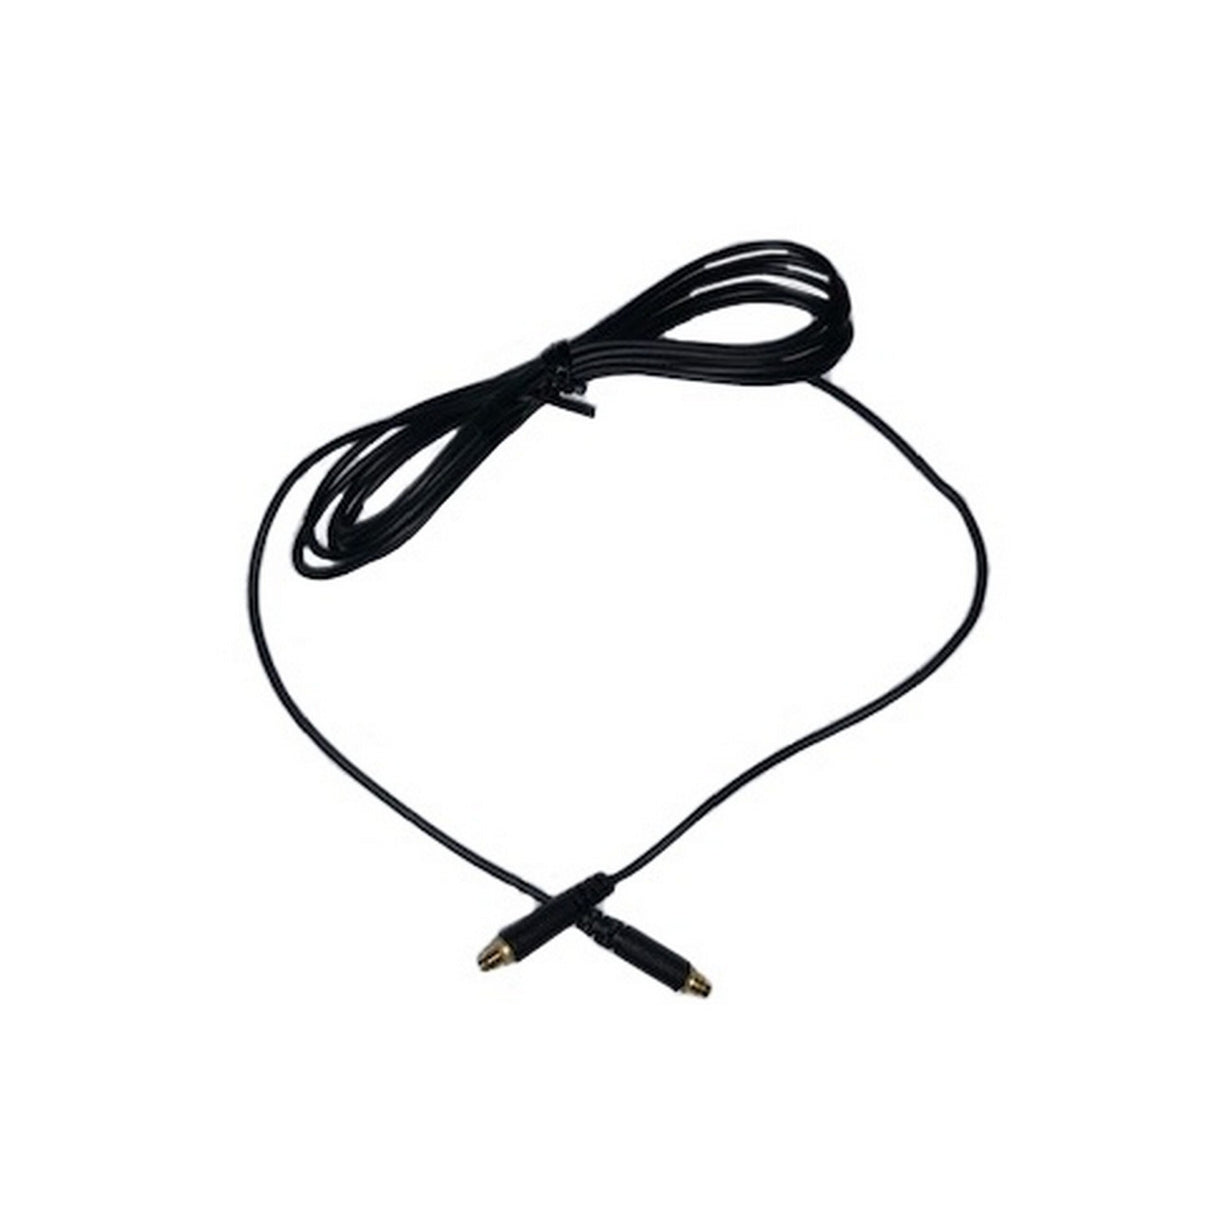 Avlex HS-09CBKC Replacement Cable for HS-Series Headset Microphones, Black